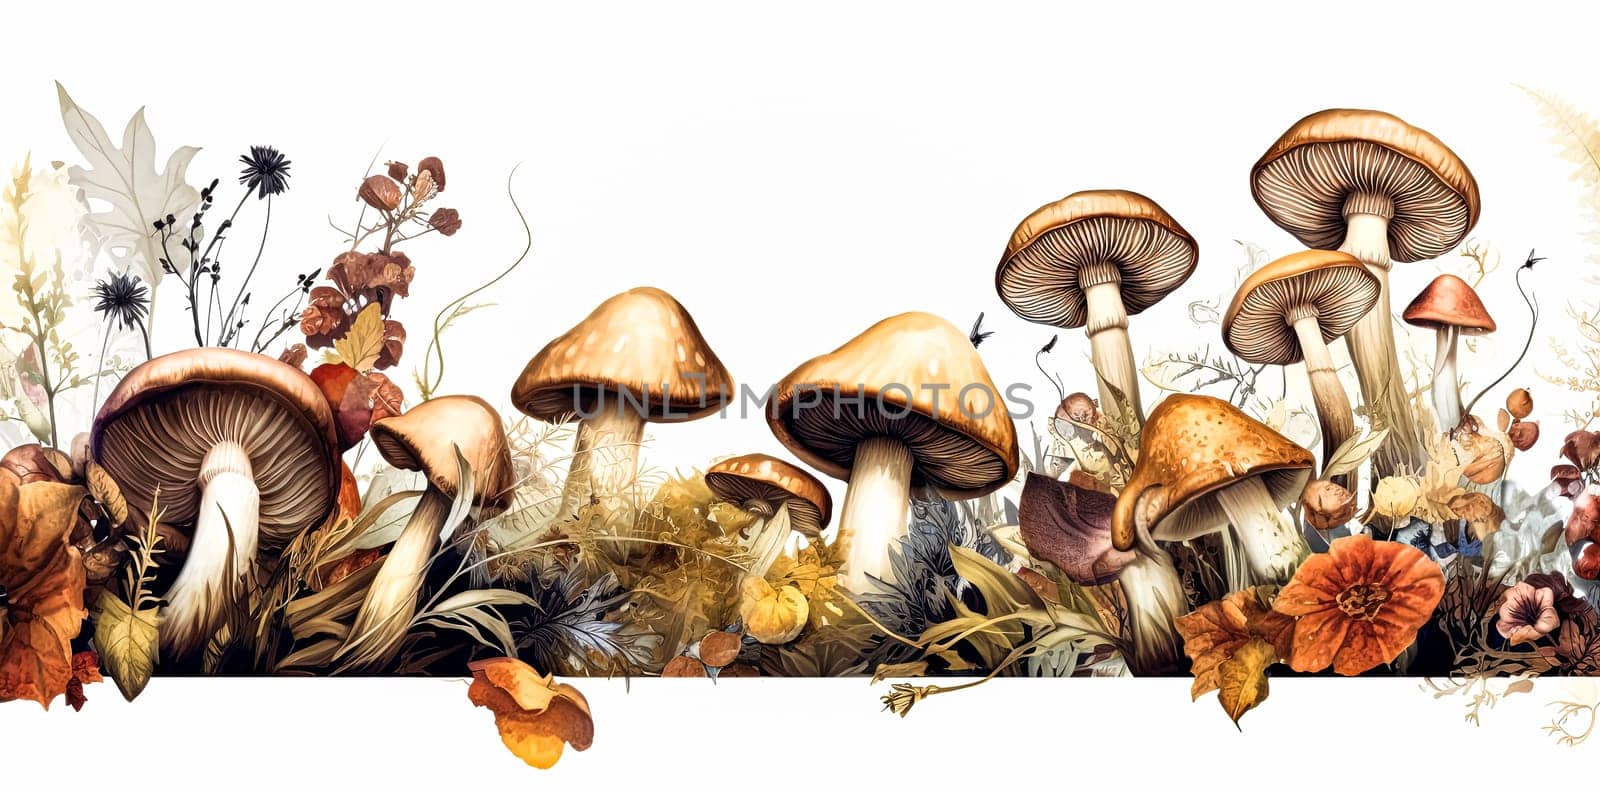 A row of mushrooms are shown in a field of grass. by Alla_Morozova93